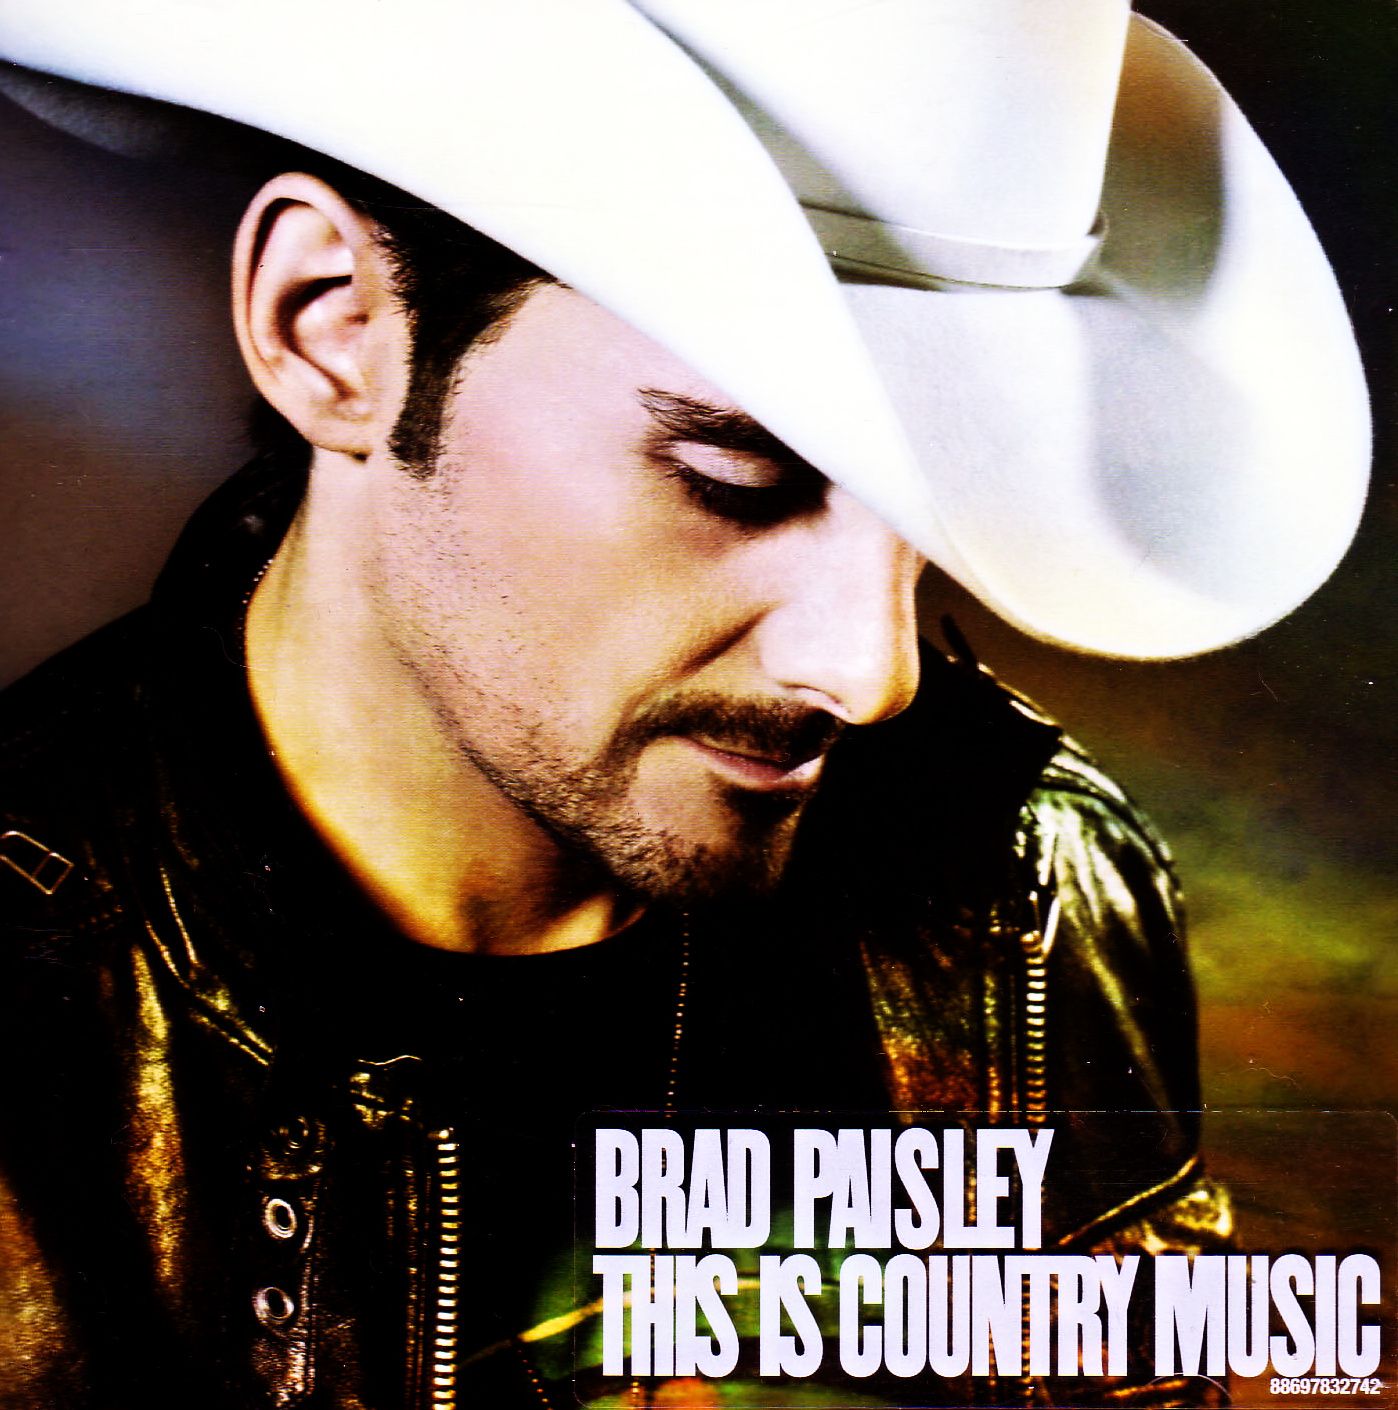 Brad Paisley - This Is Country Music - Album Cover